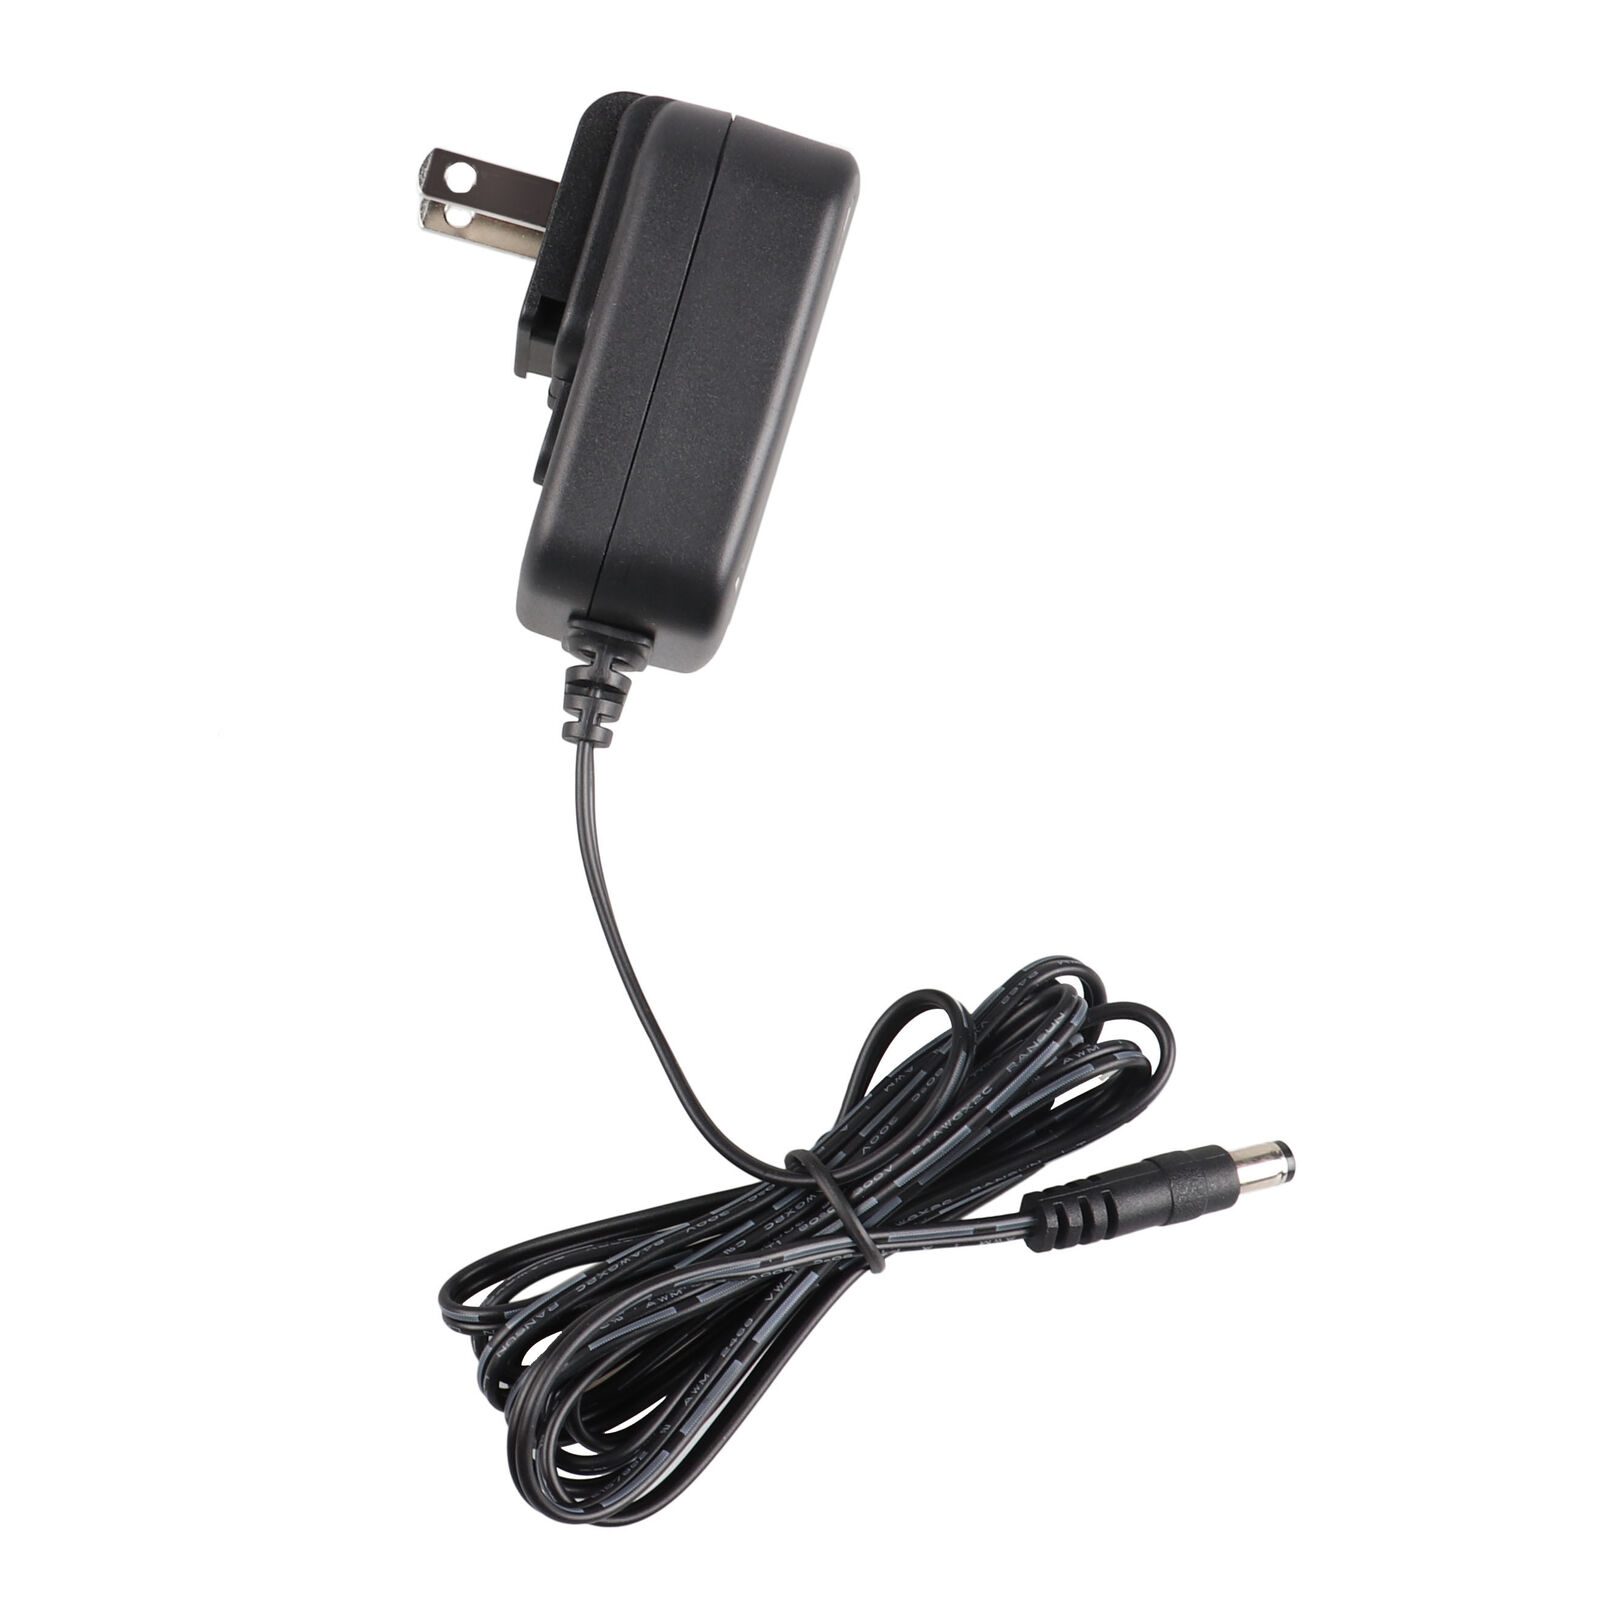 AC Adapter For Sony SRS-XB30 Wireless Speaker DC Power Supply Charger Cord Cable Input: AC 100--240V, 50-60Hz Output: D